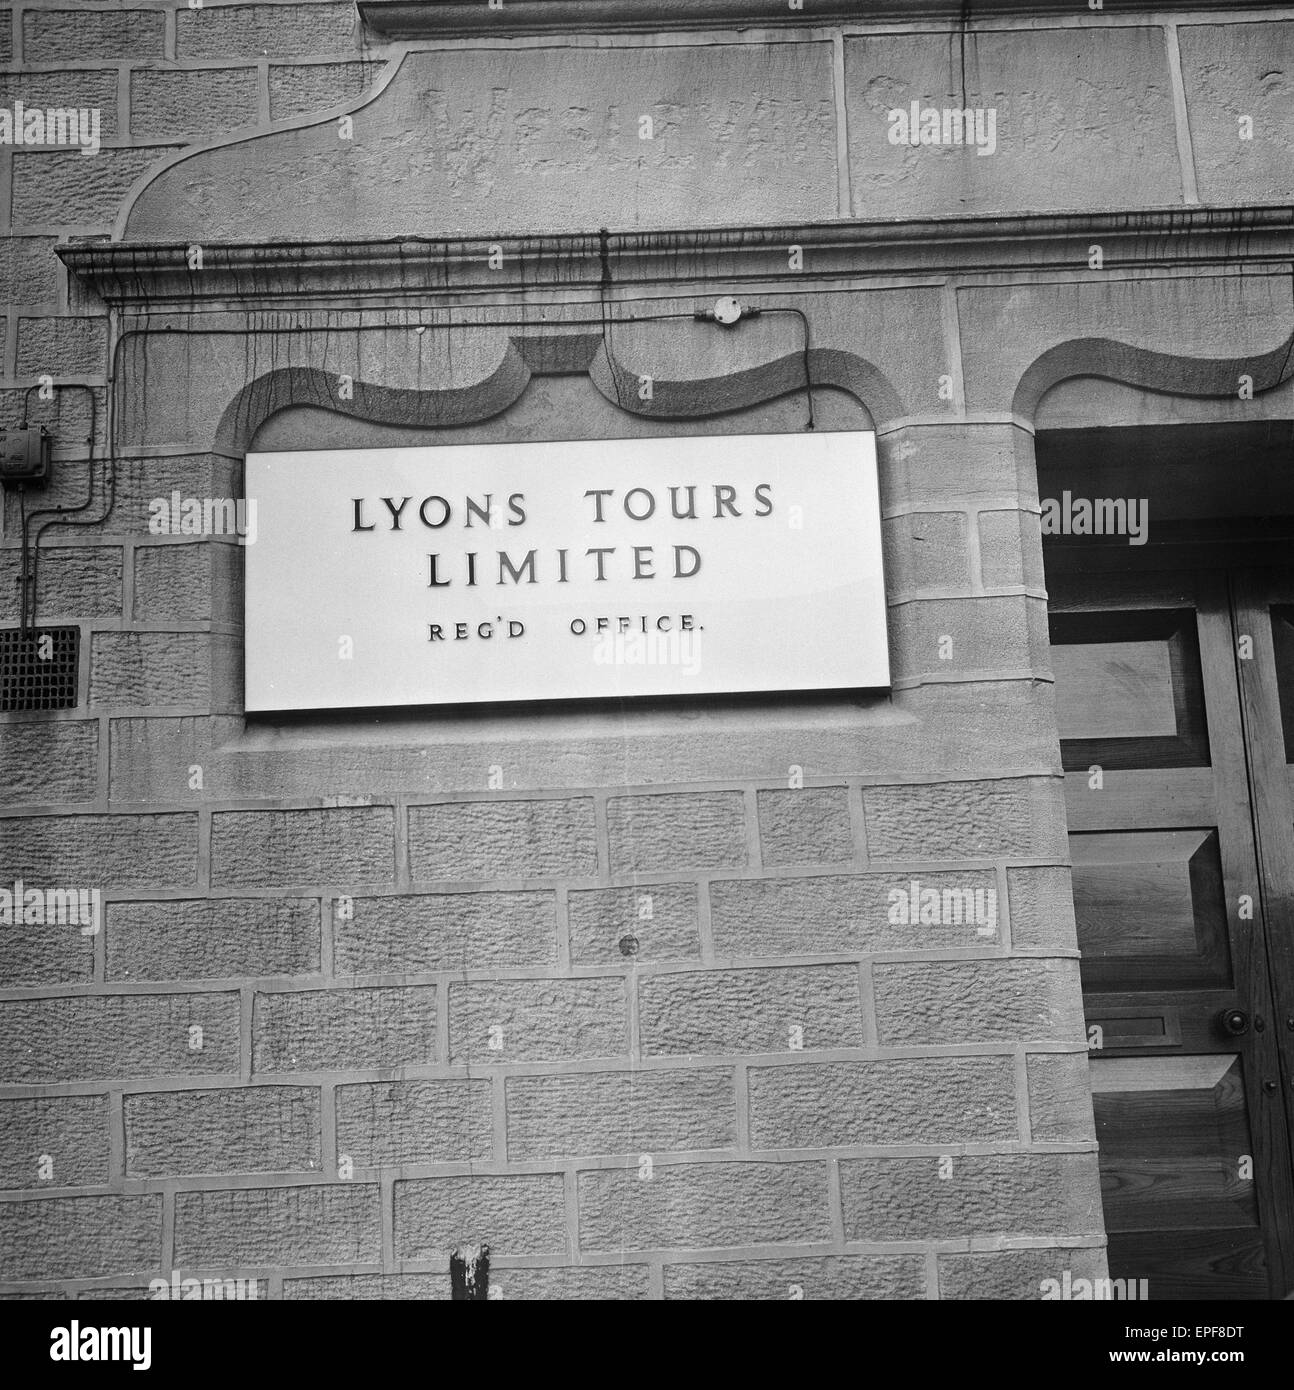 Lyons Tours of Colne, near Burnley in Lancashire chartered an Air Ferry DC-4 which crashed near Perpignan in southern France on the 3rd June 1967. A Douglas DC-4 registered G-APYK on a non-scheduled charter flight between Manston Airport in Kent, England and Perpignan Airport in France hit the Canigou mountain in France killing all 88 on board. Cause of the accident was determined to be carbon monoxide poisoning of the flight crew due to a faulty cabin heater Stock Photo